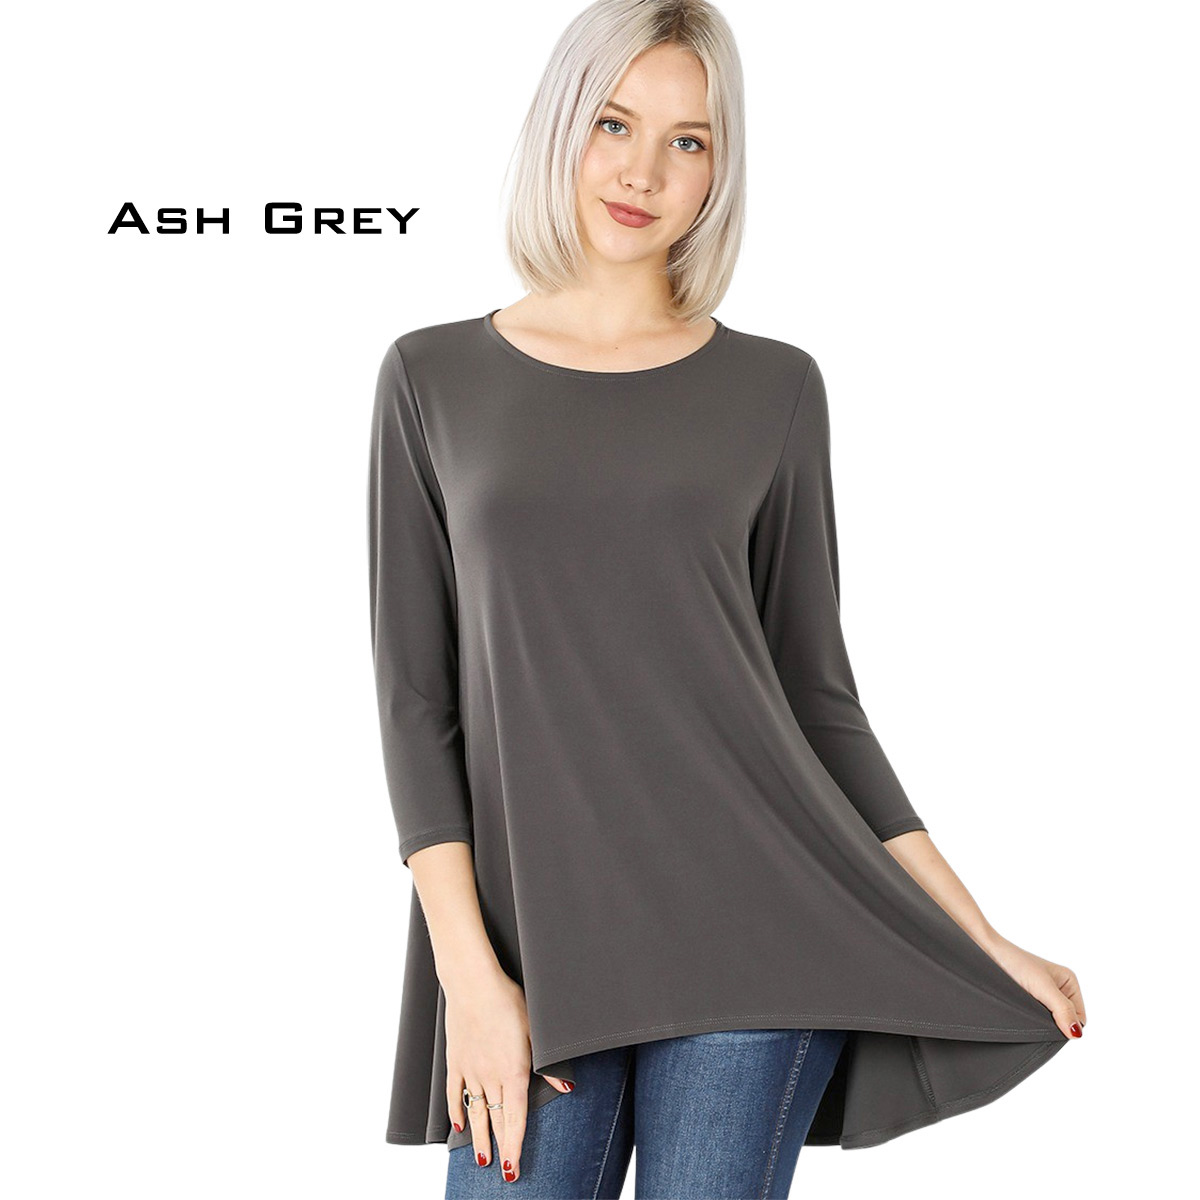 ASH GREY Ity High-Low 3/4 Sleeve Top 2367